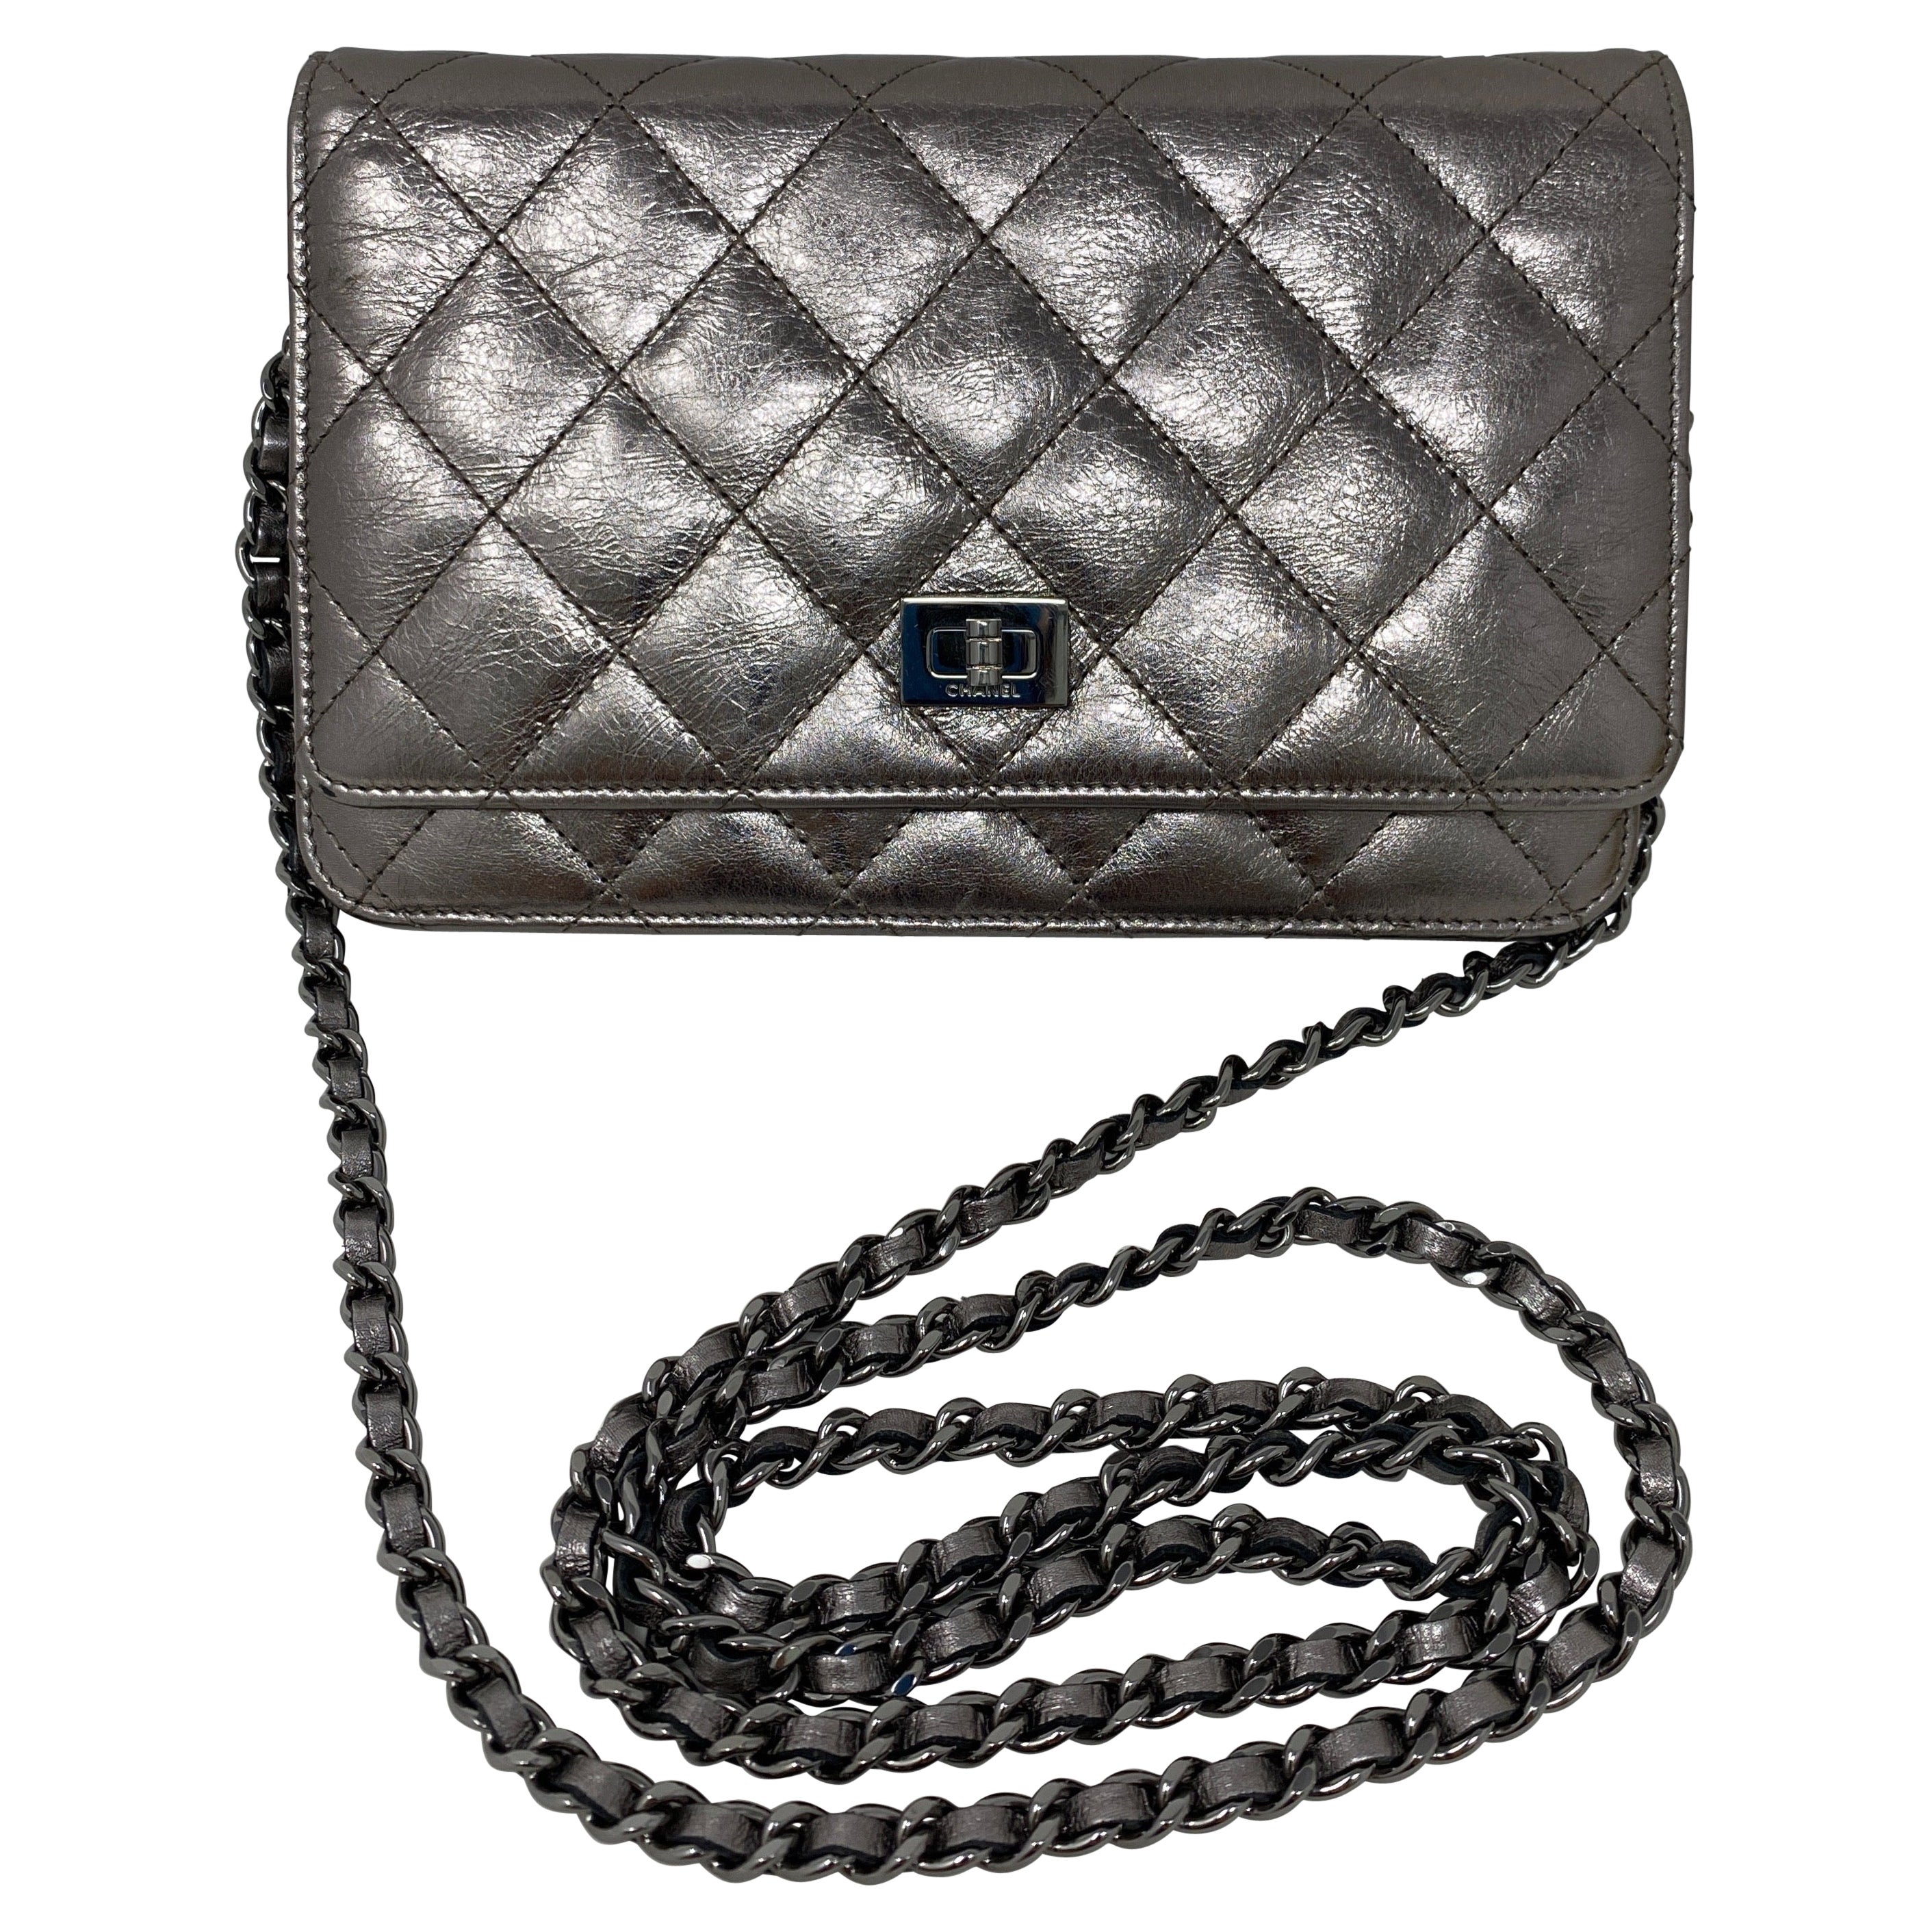 Chanel Reissue Woc - For Sale on 1stDibs